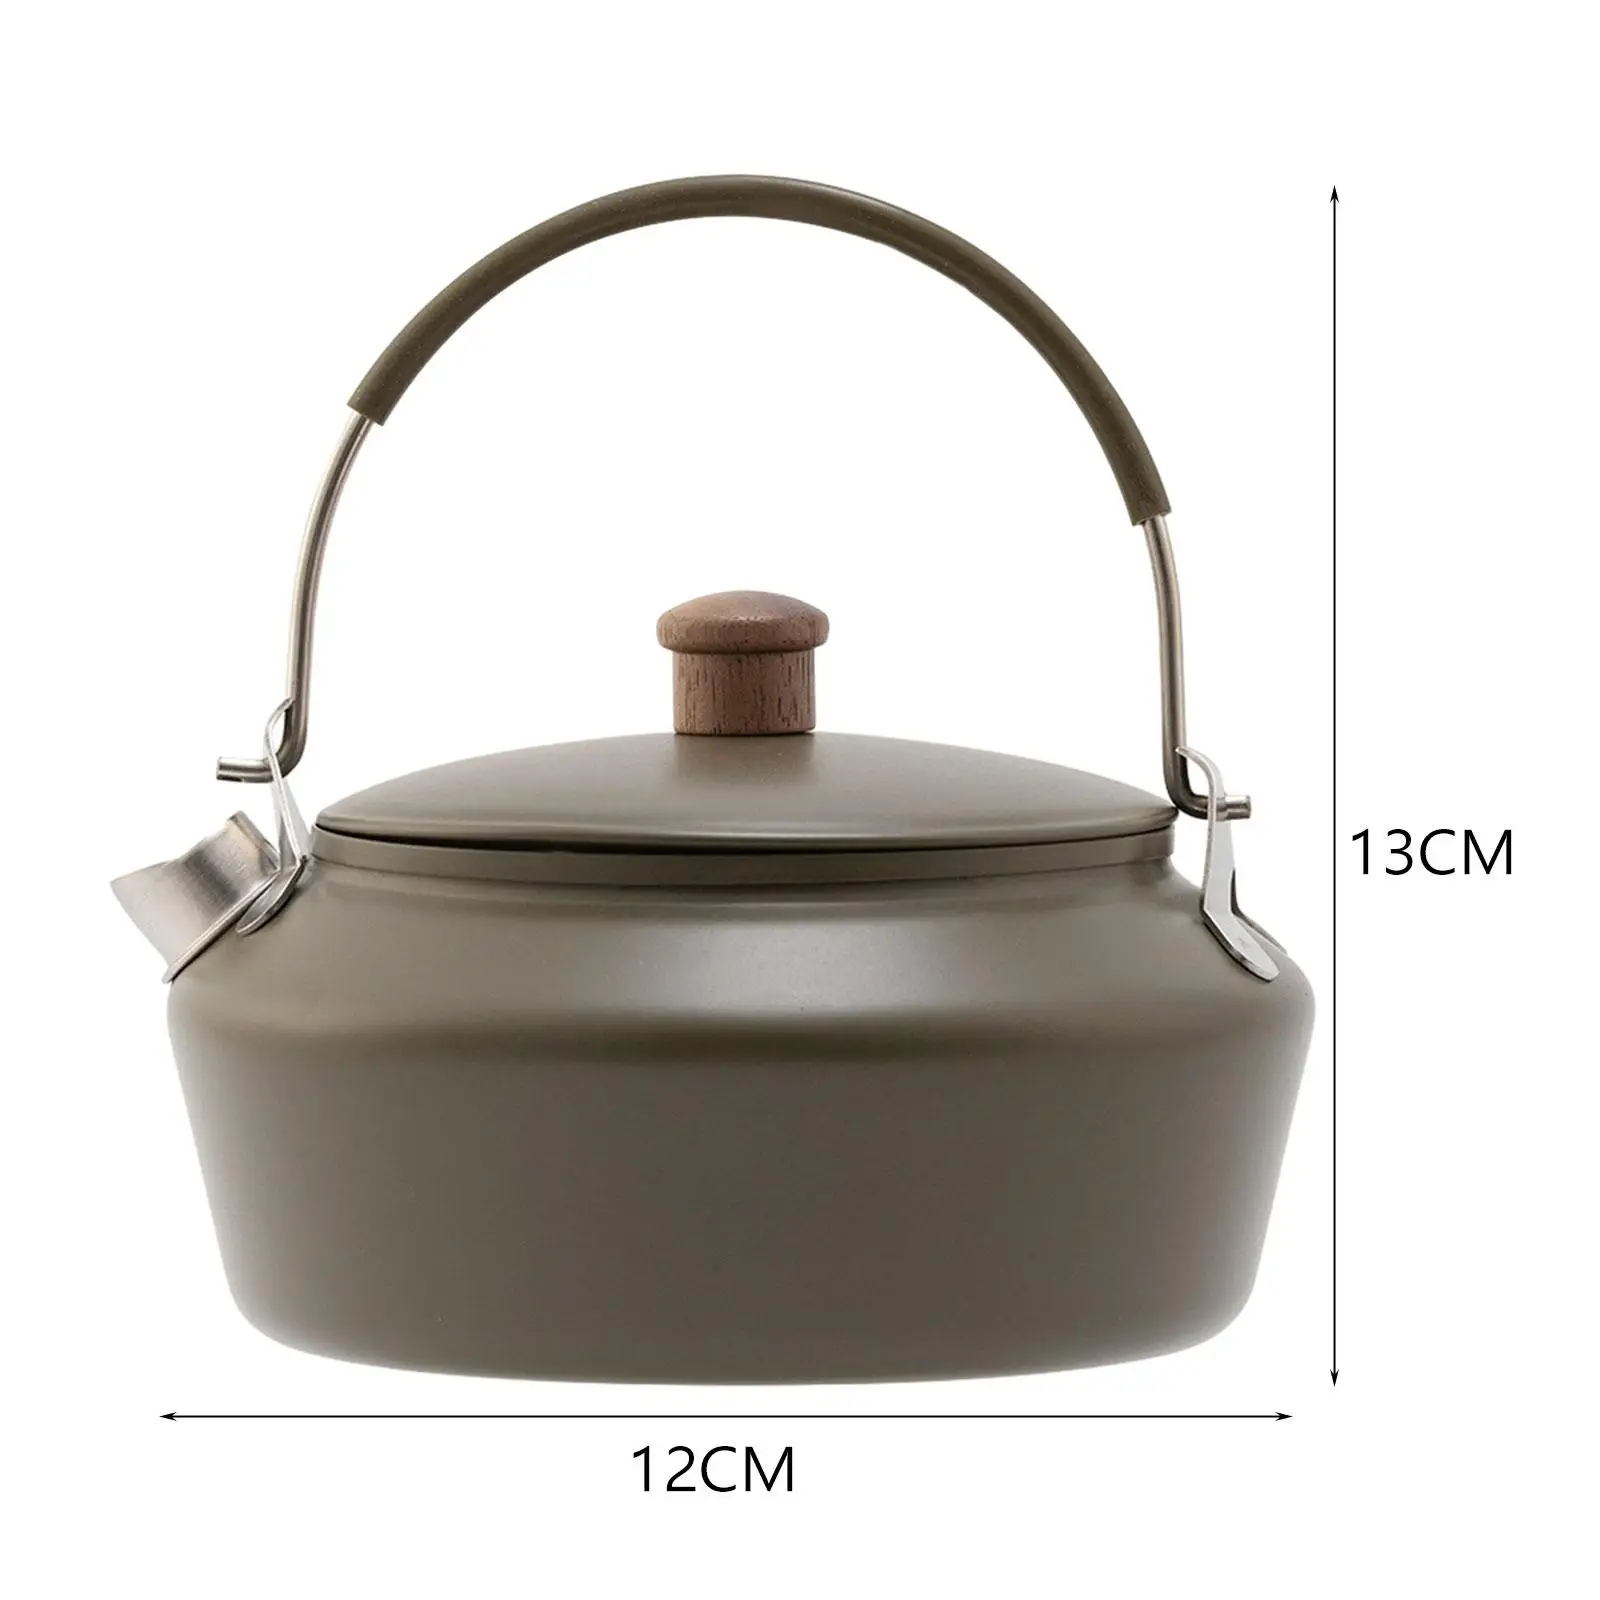 1 Liter Camping Kettle Picnic Teapot with Silicon Handle Stainless Steel Coffee Pot for Road Trip Picnics Hiking Outdoor Camping